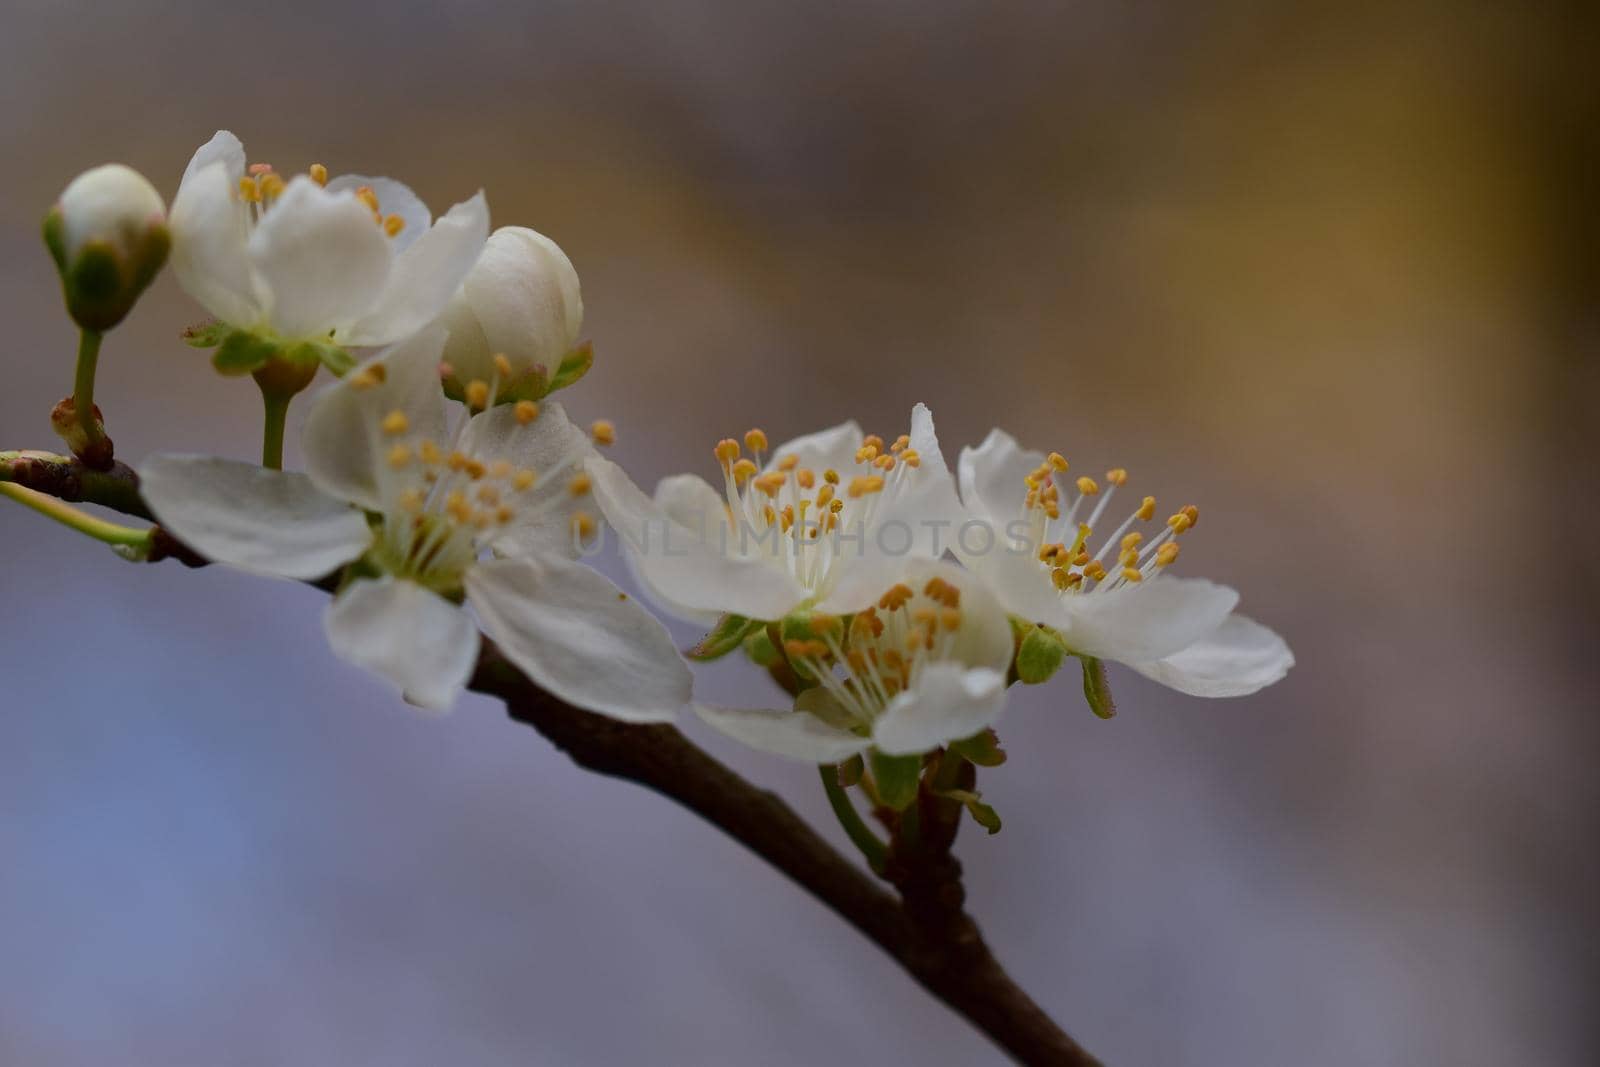 Close up of white blossoms against a blurry background